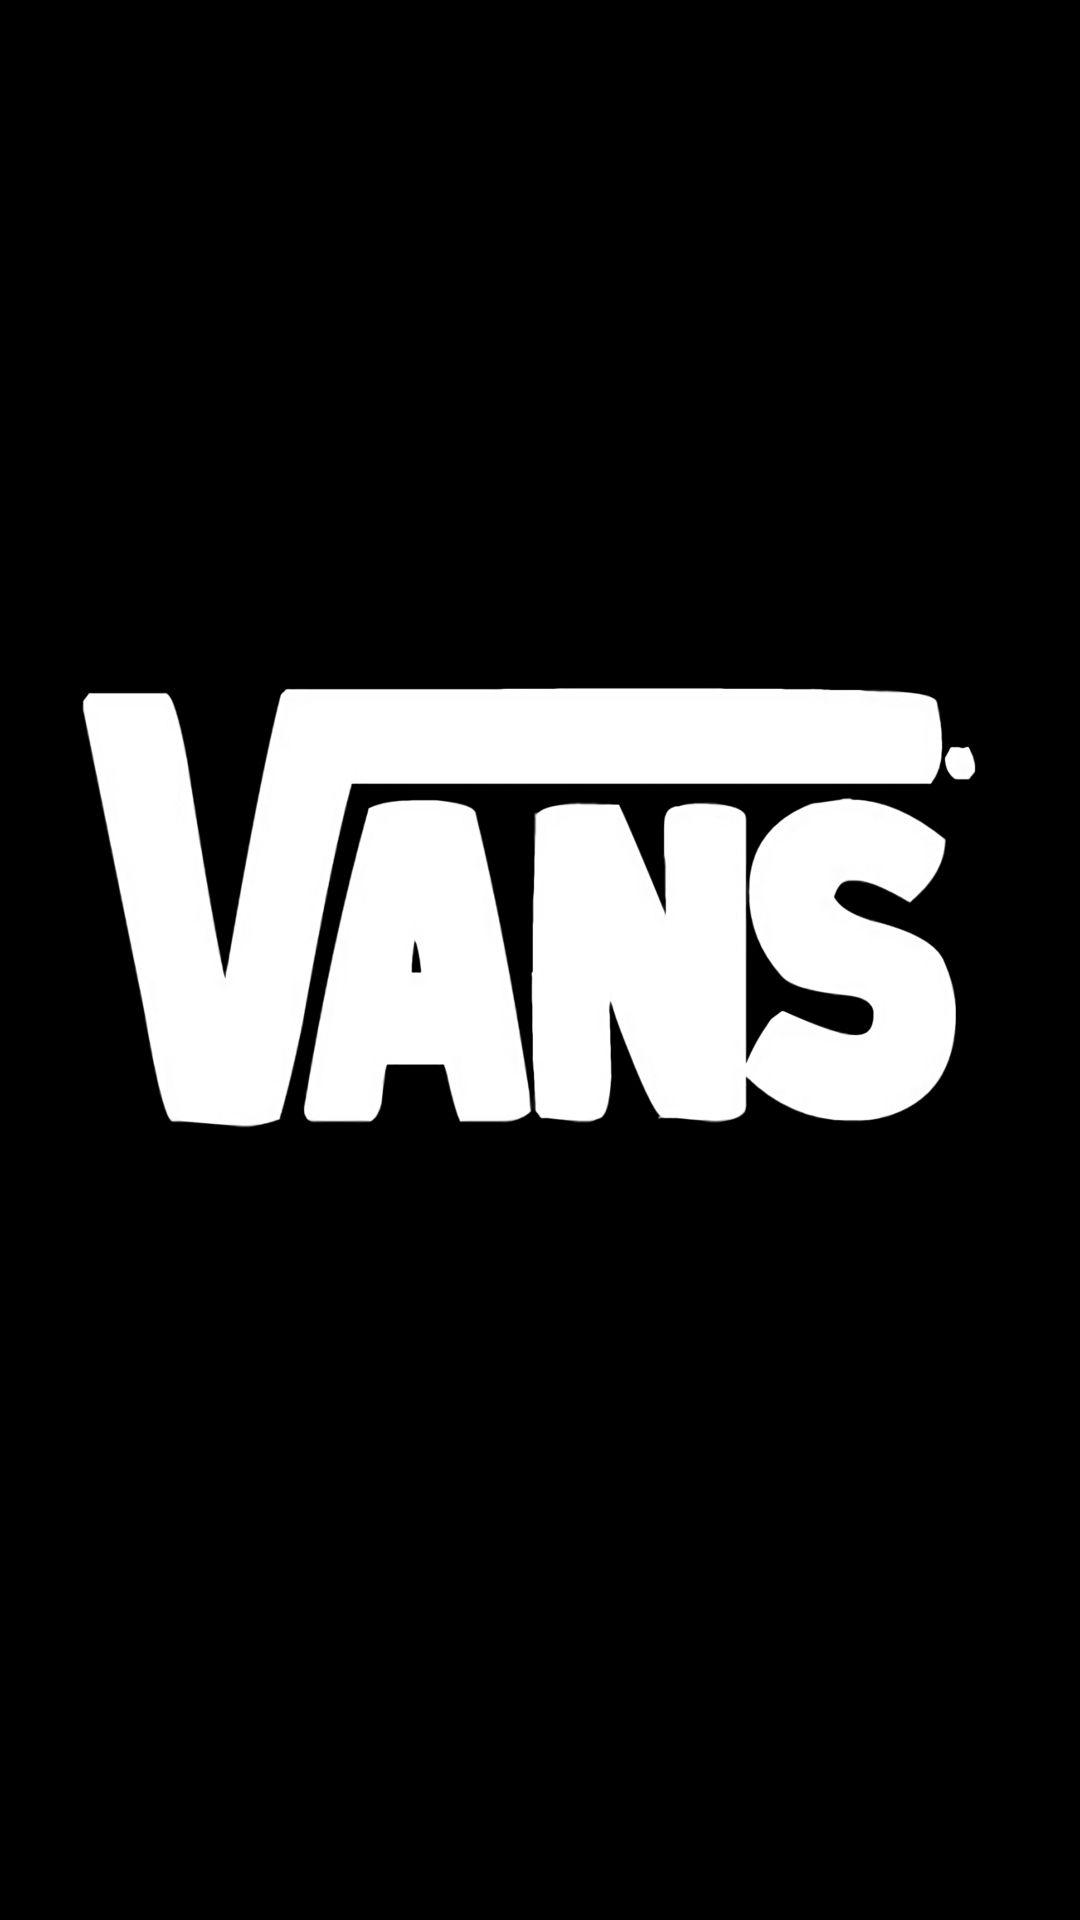 Vans to see more creative wallpaper!